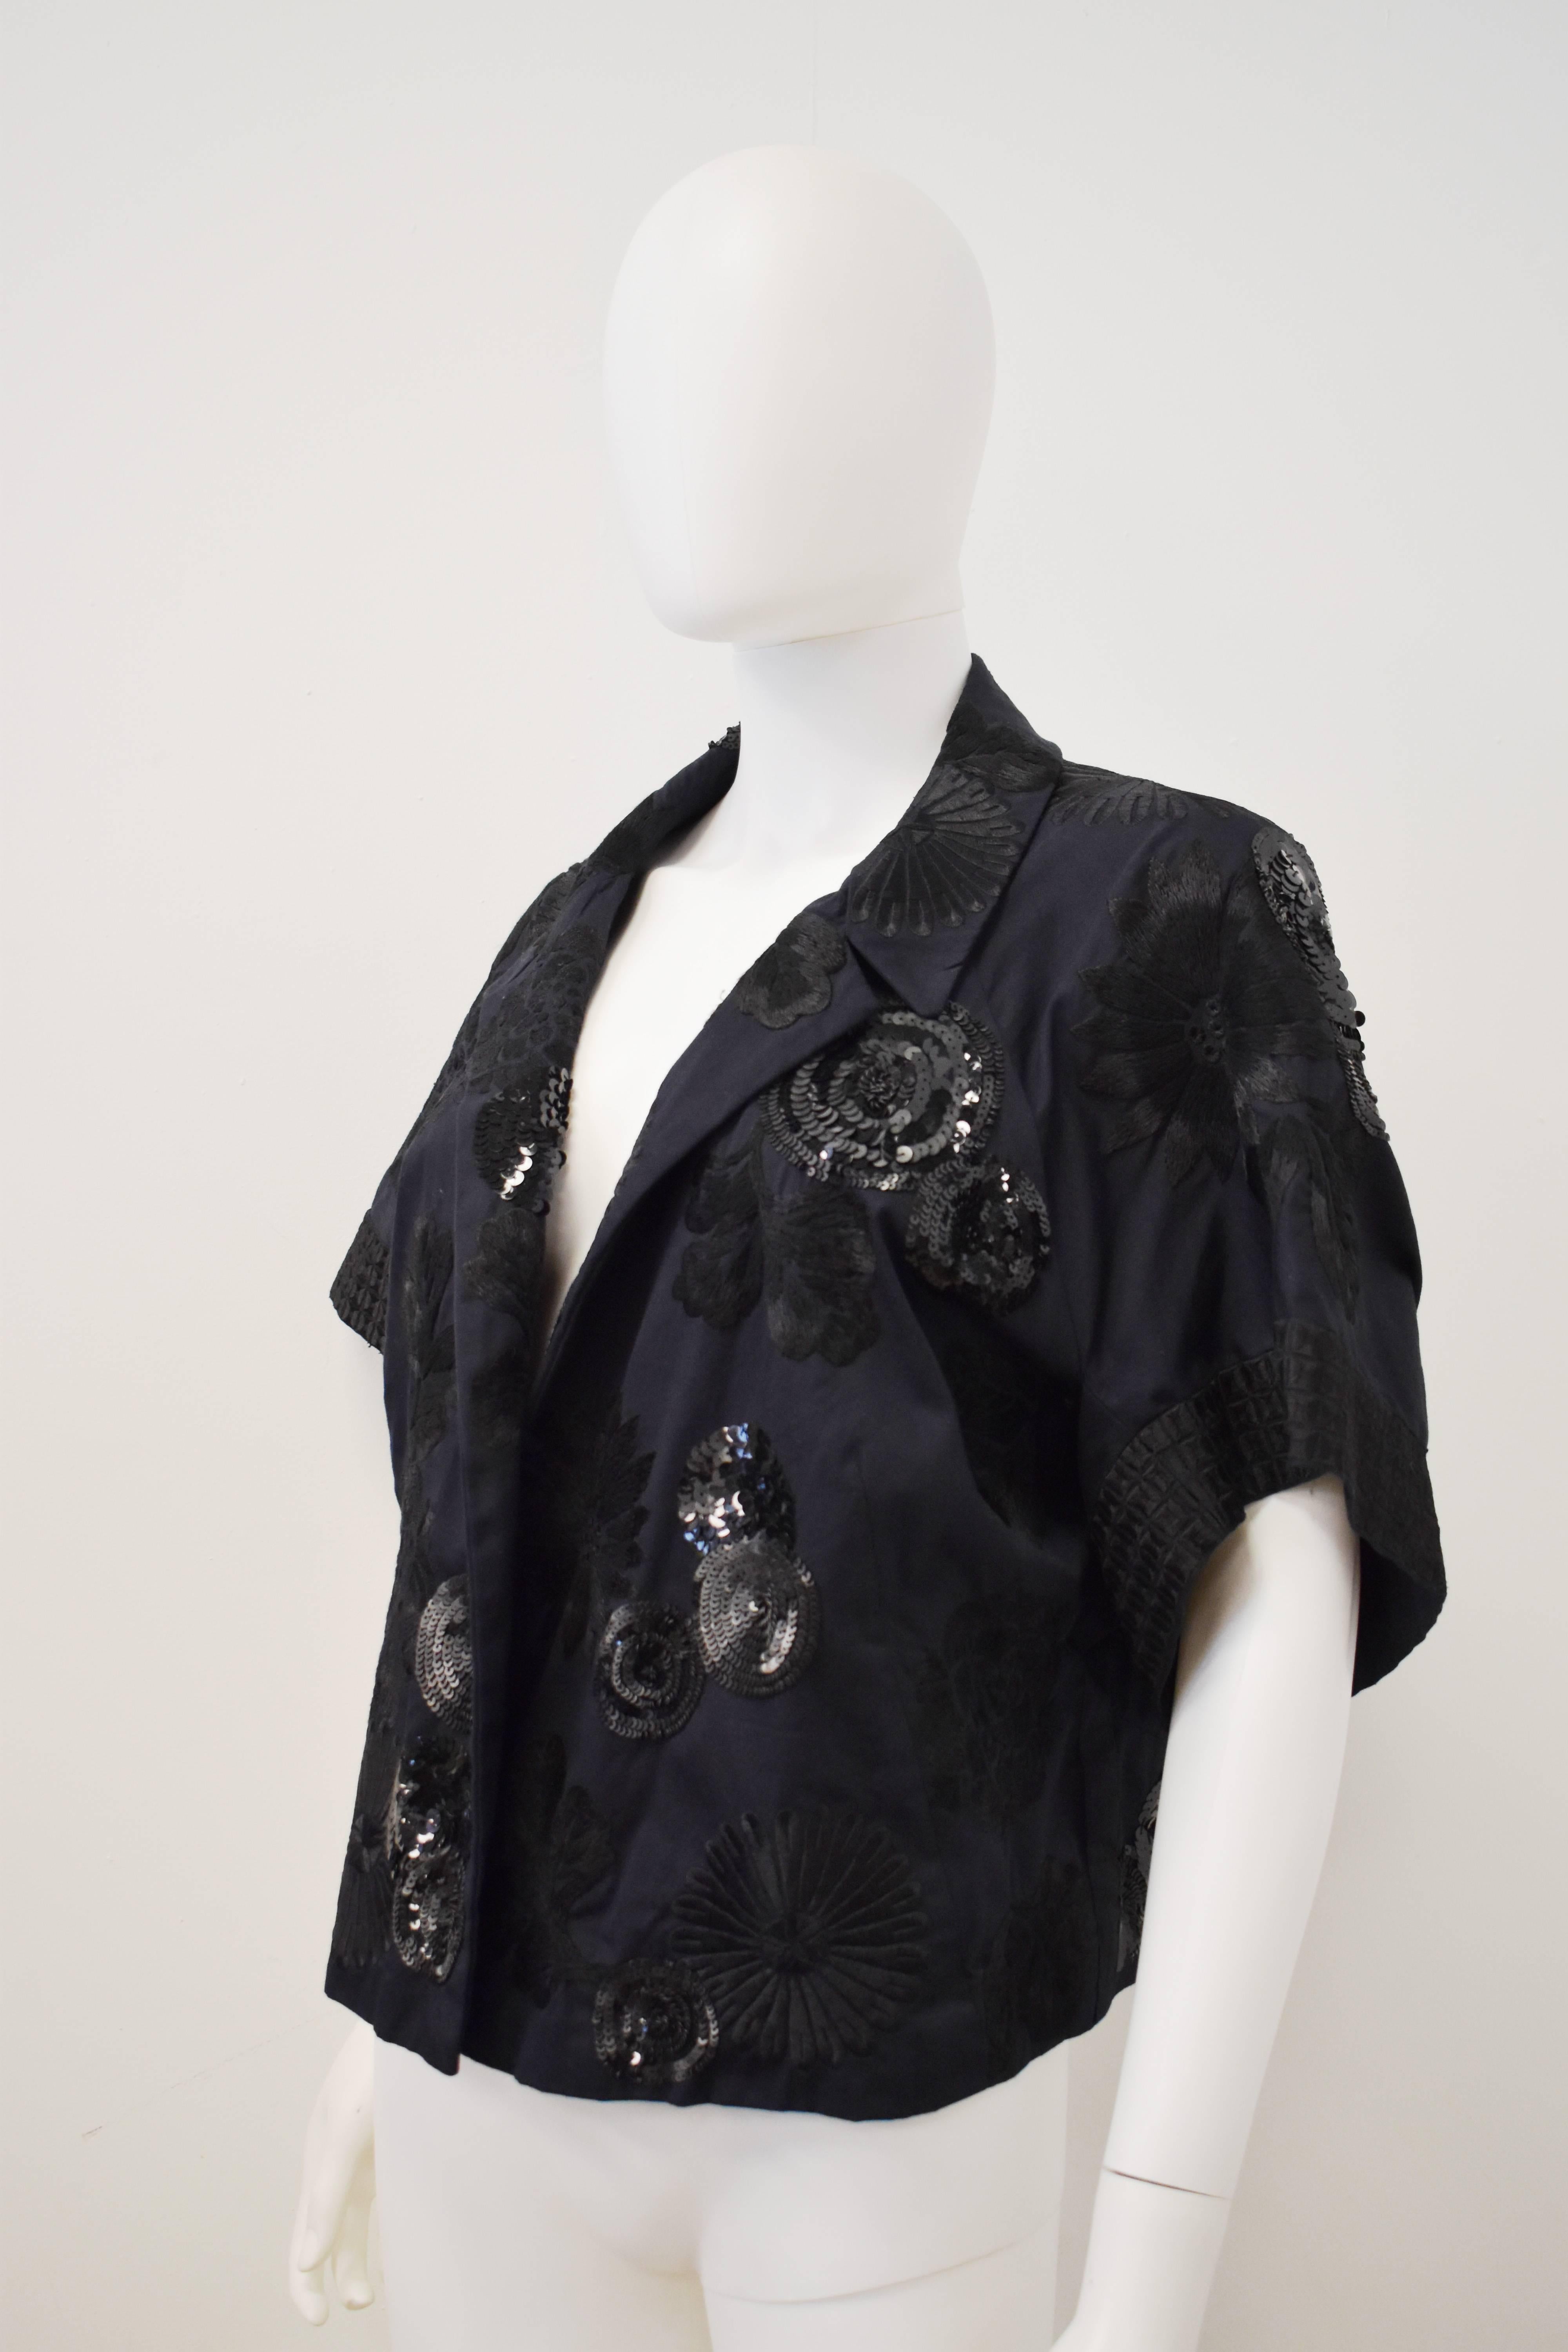 Dries Van Noten black cropped jacket with floral embroideries and circular sequin details. Haori-like cut. 